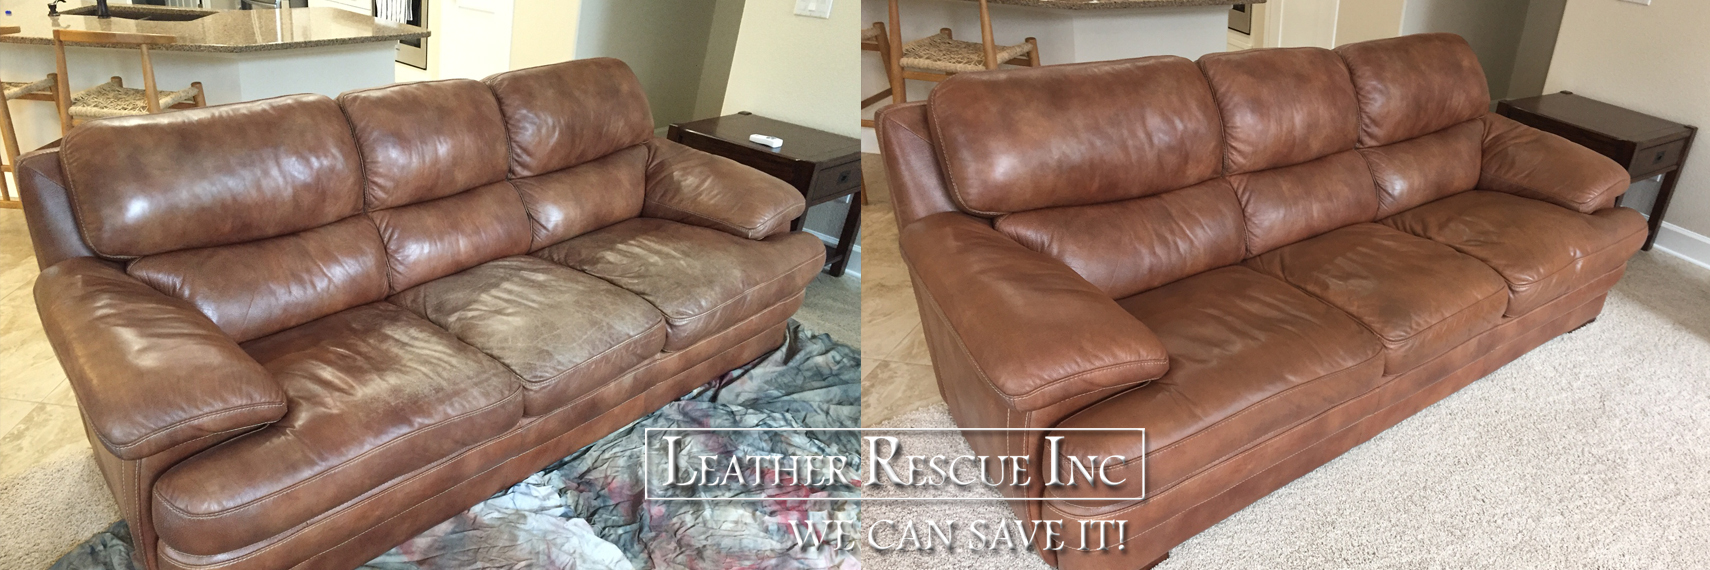 Leather Rescue Inc Leather Repair Refinishing Central Orlando